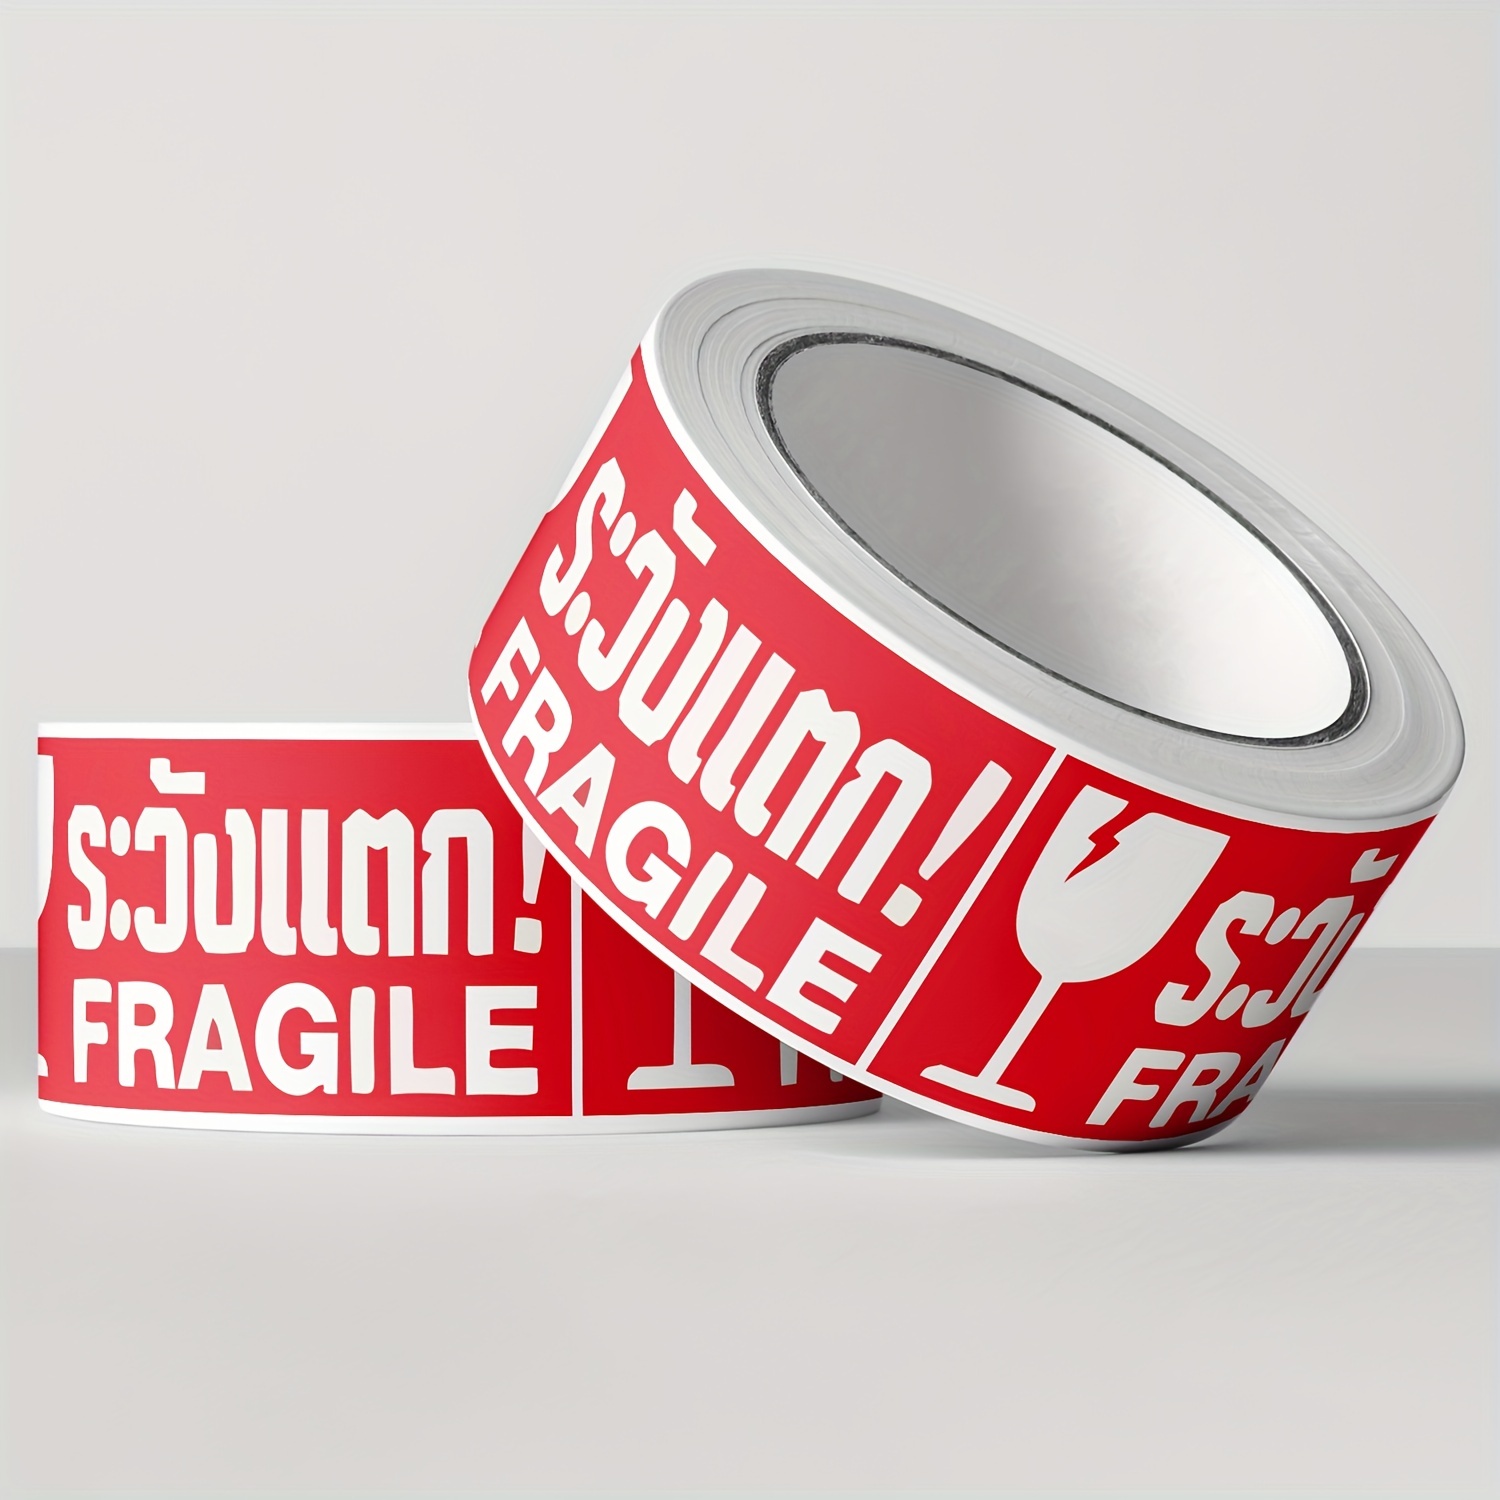 FRAGILE GLASS Labels - Self adhesive handle with care Stickers